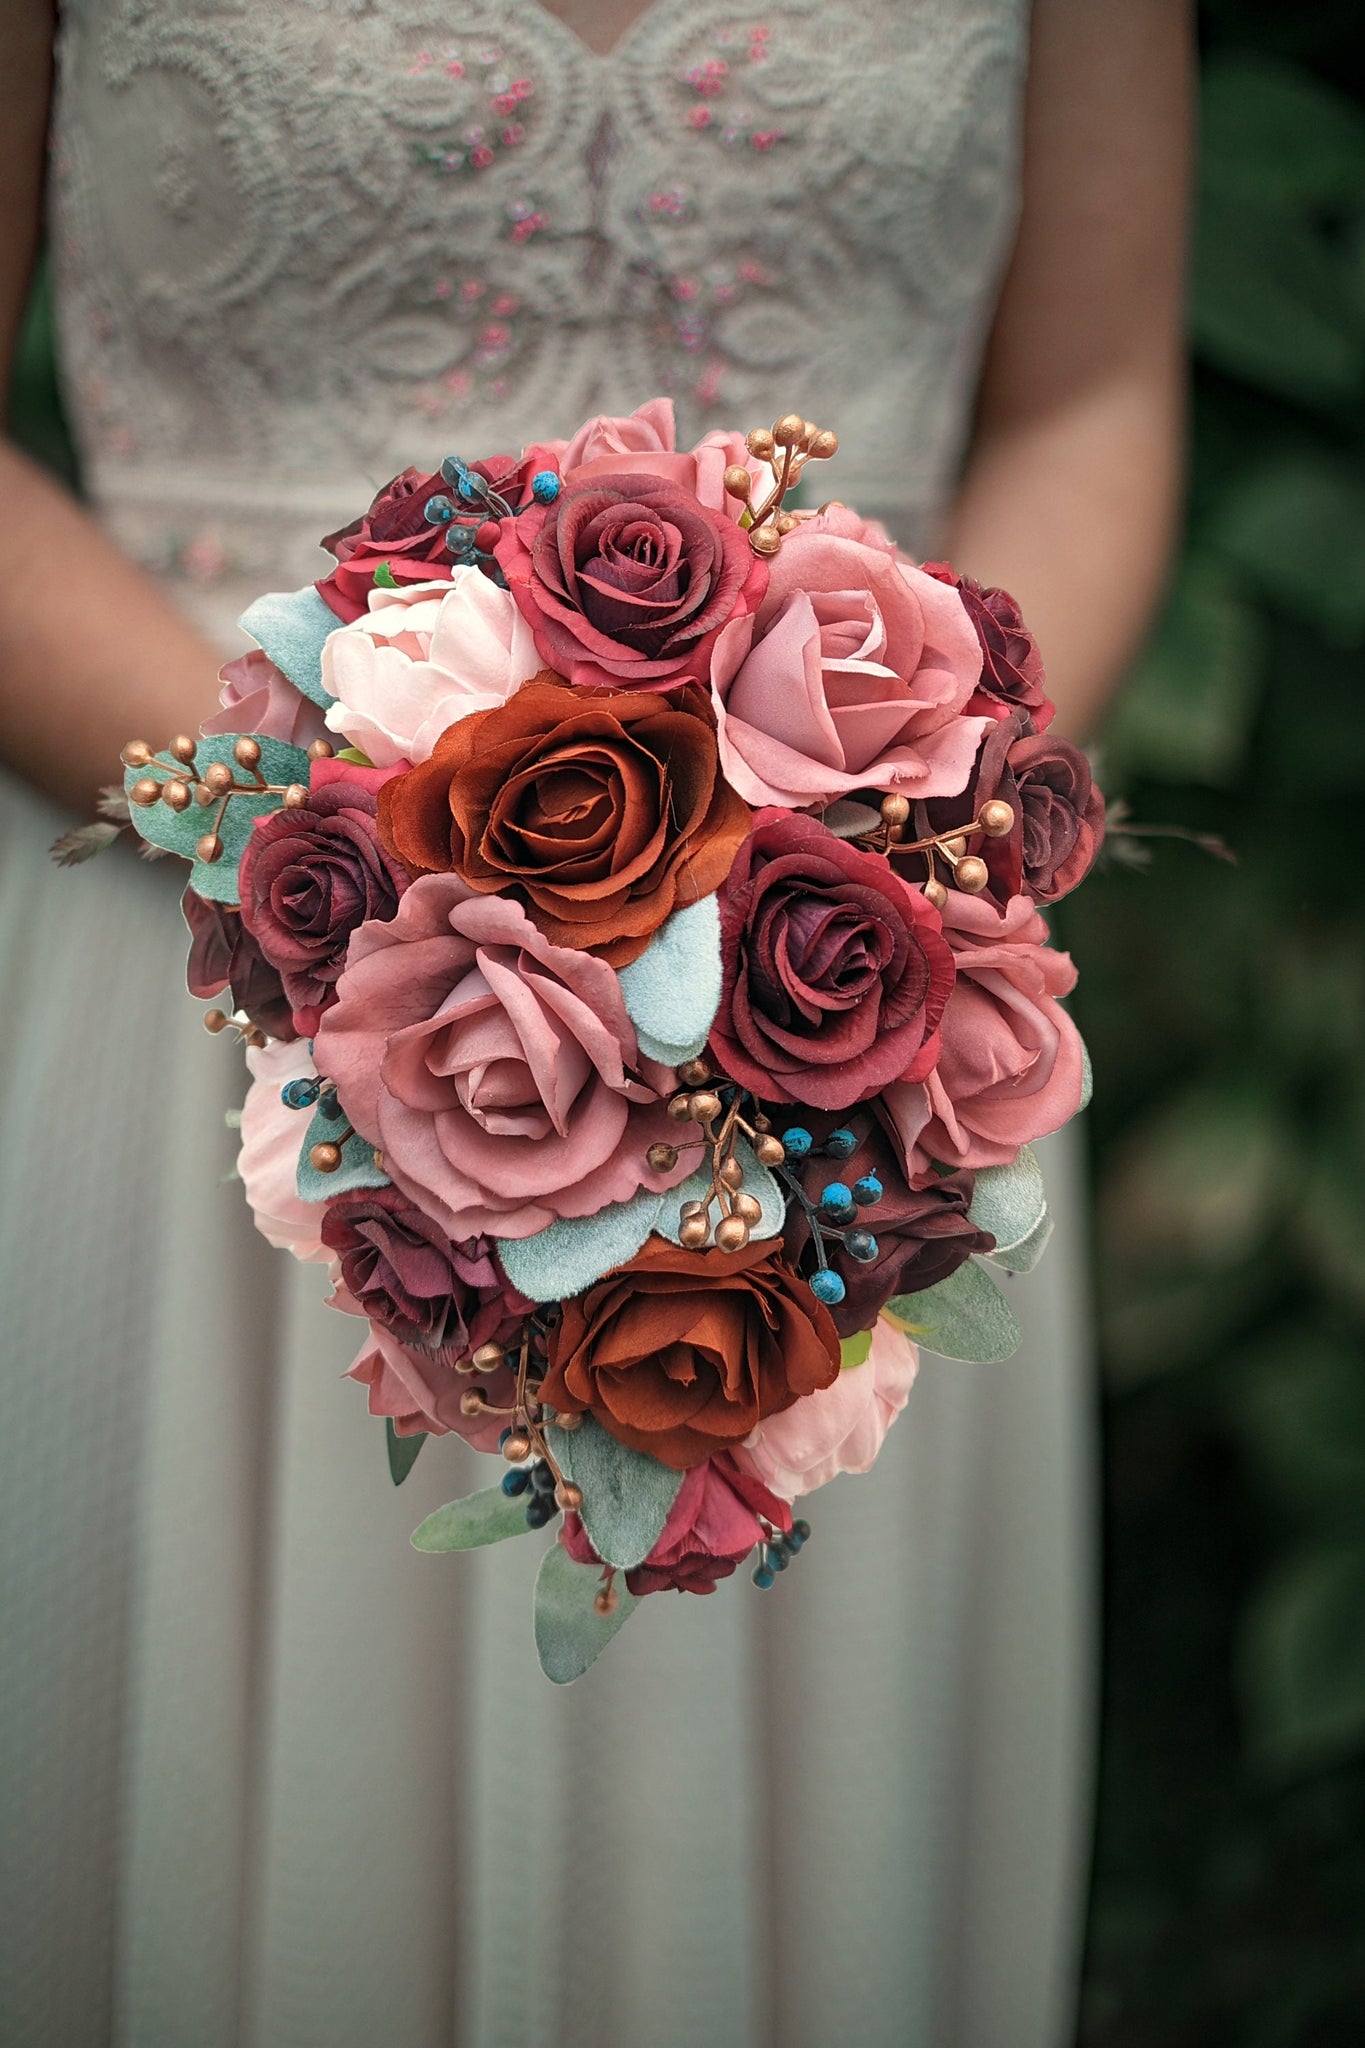 Cascade Bridal Bouquet Burgundy Rust Navy Dusty Mauve Rose Gold - Roses Peonies Berries - Add Groom Boutonniere Bridesmaid Bouquet & More!